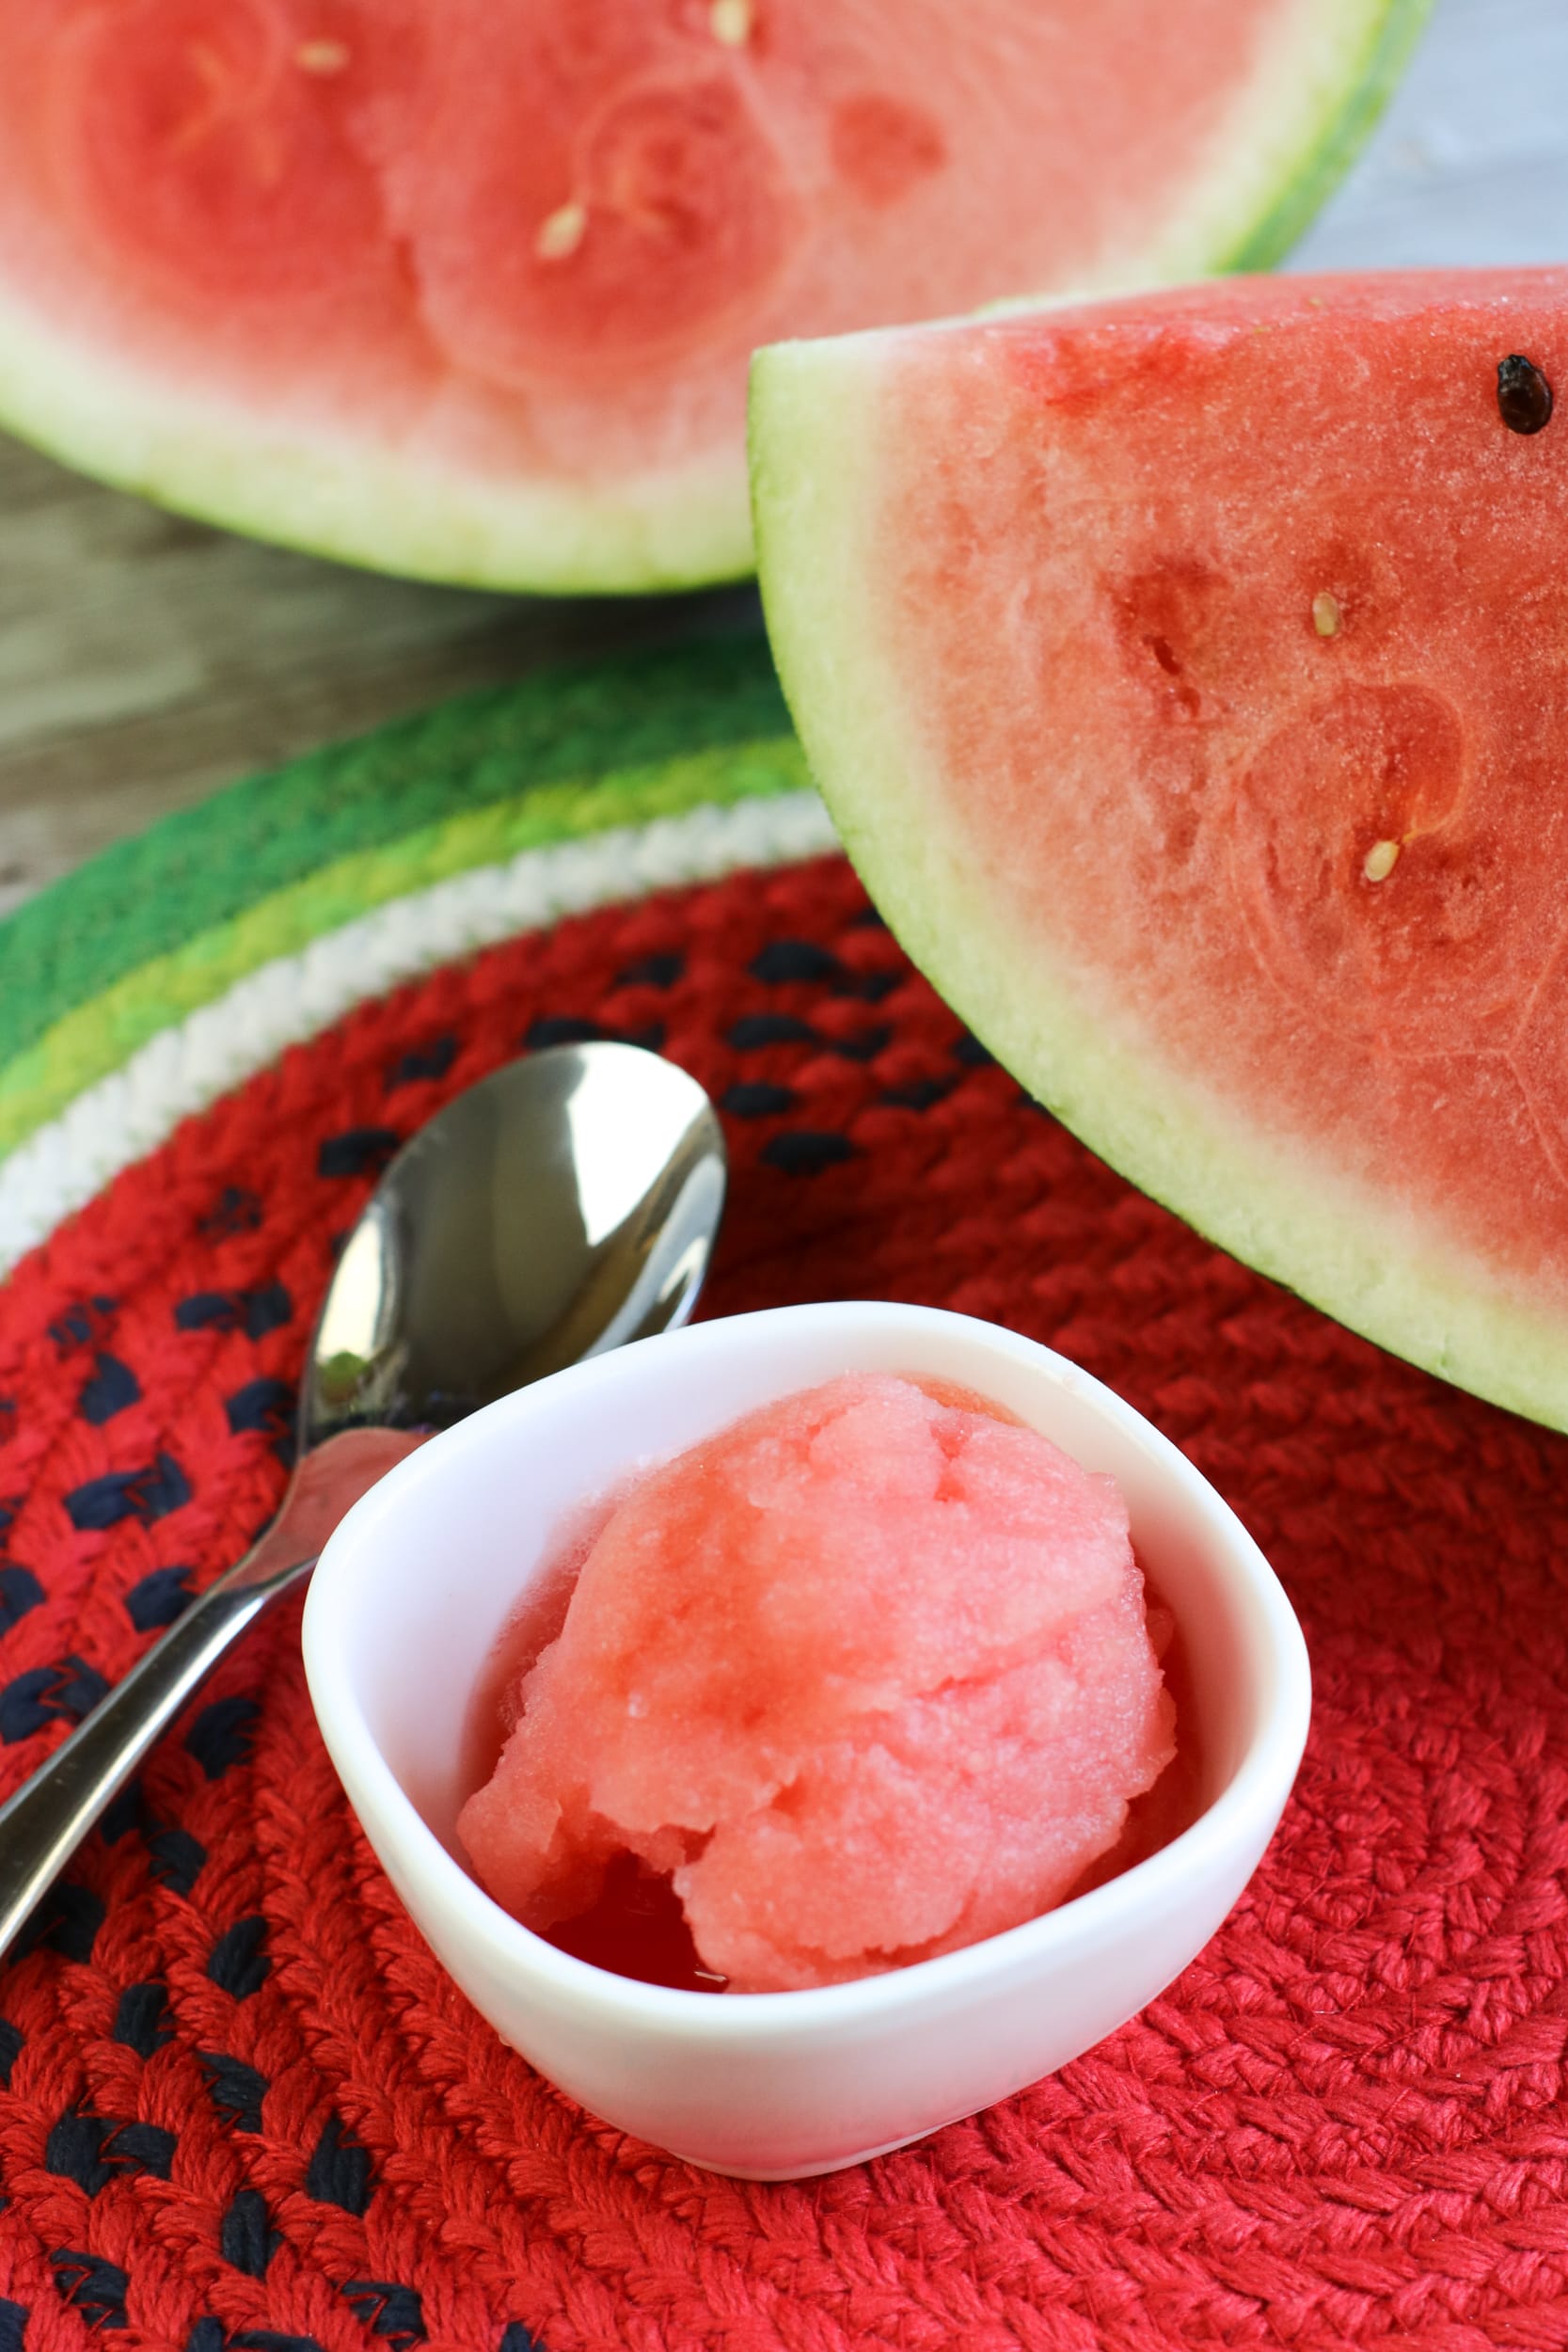 This simple and refreshing Watermelon Sorbet Recipe is one of a kind. A delicious and light watermelon dessert that is perfect for summertime. This Watermelon Sorbet is an incredible dessert that everyone will love.